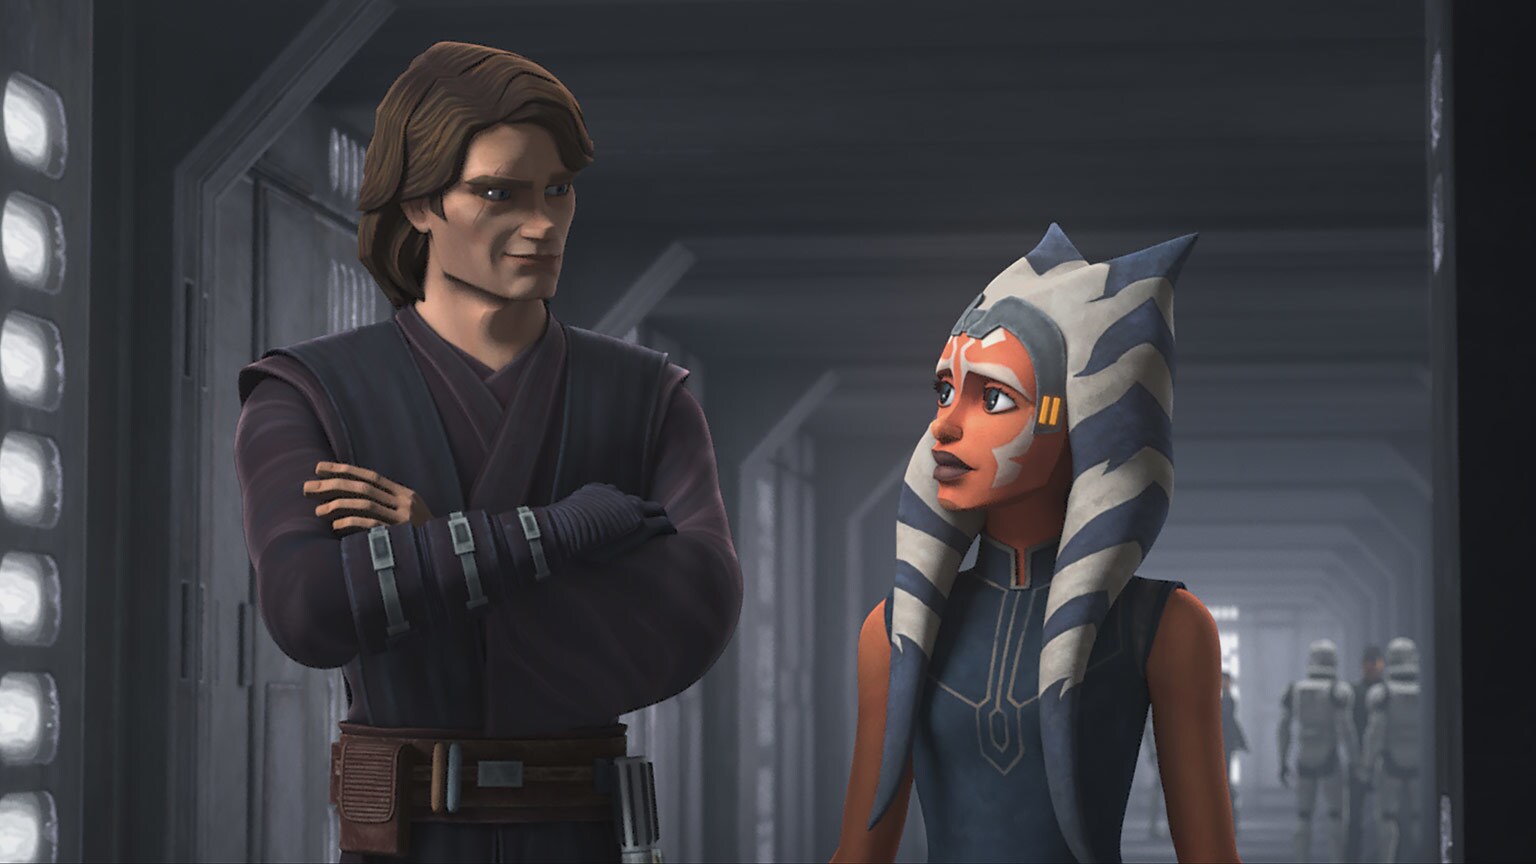 The Clone Wars Rewatch: Skyguy and Snips, "Old Friends Not Forgotten"